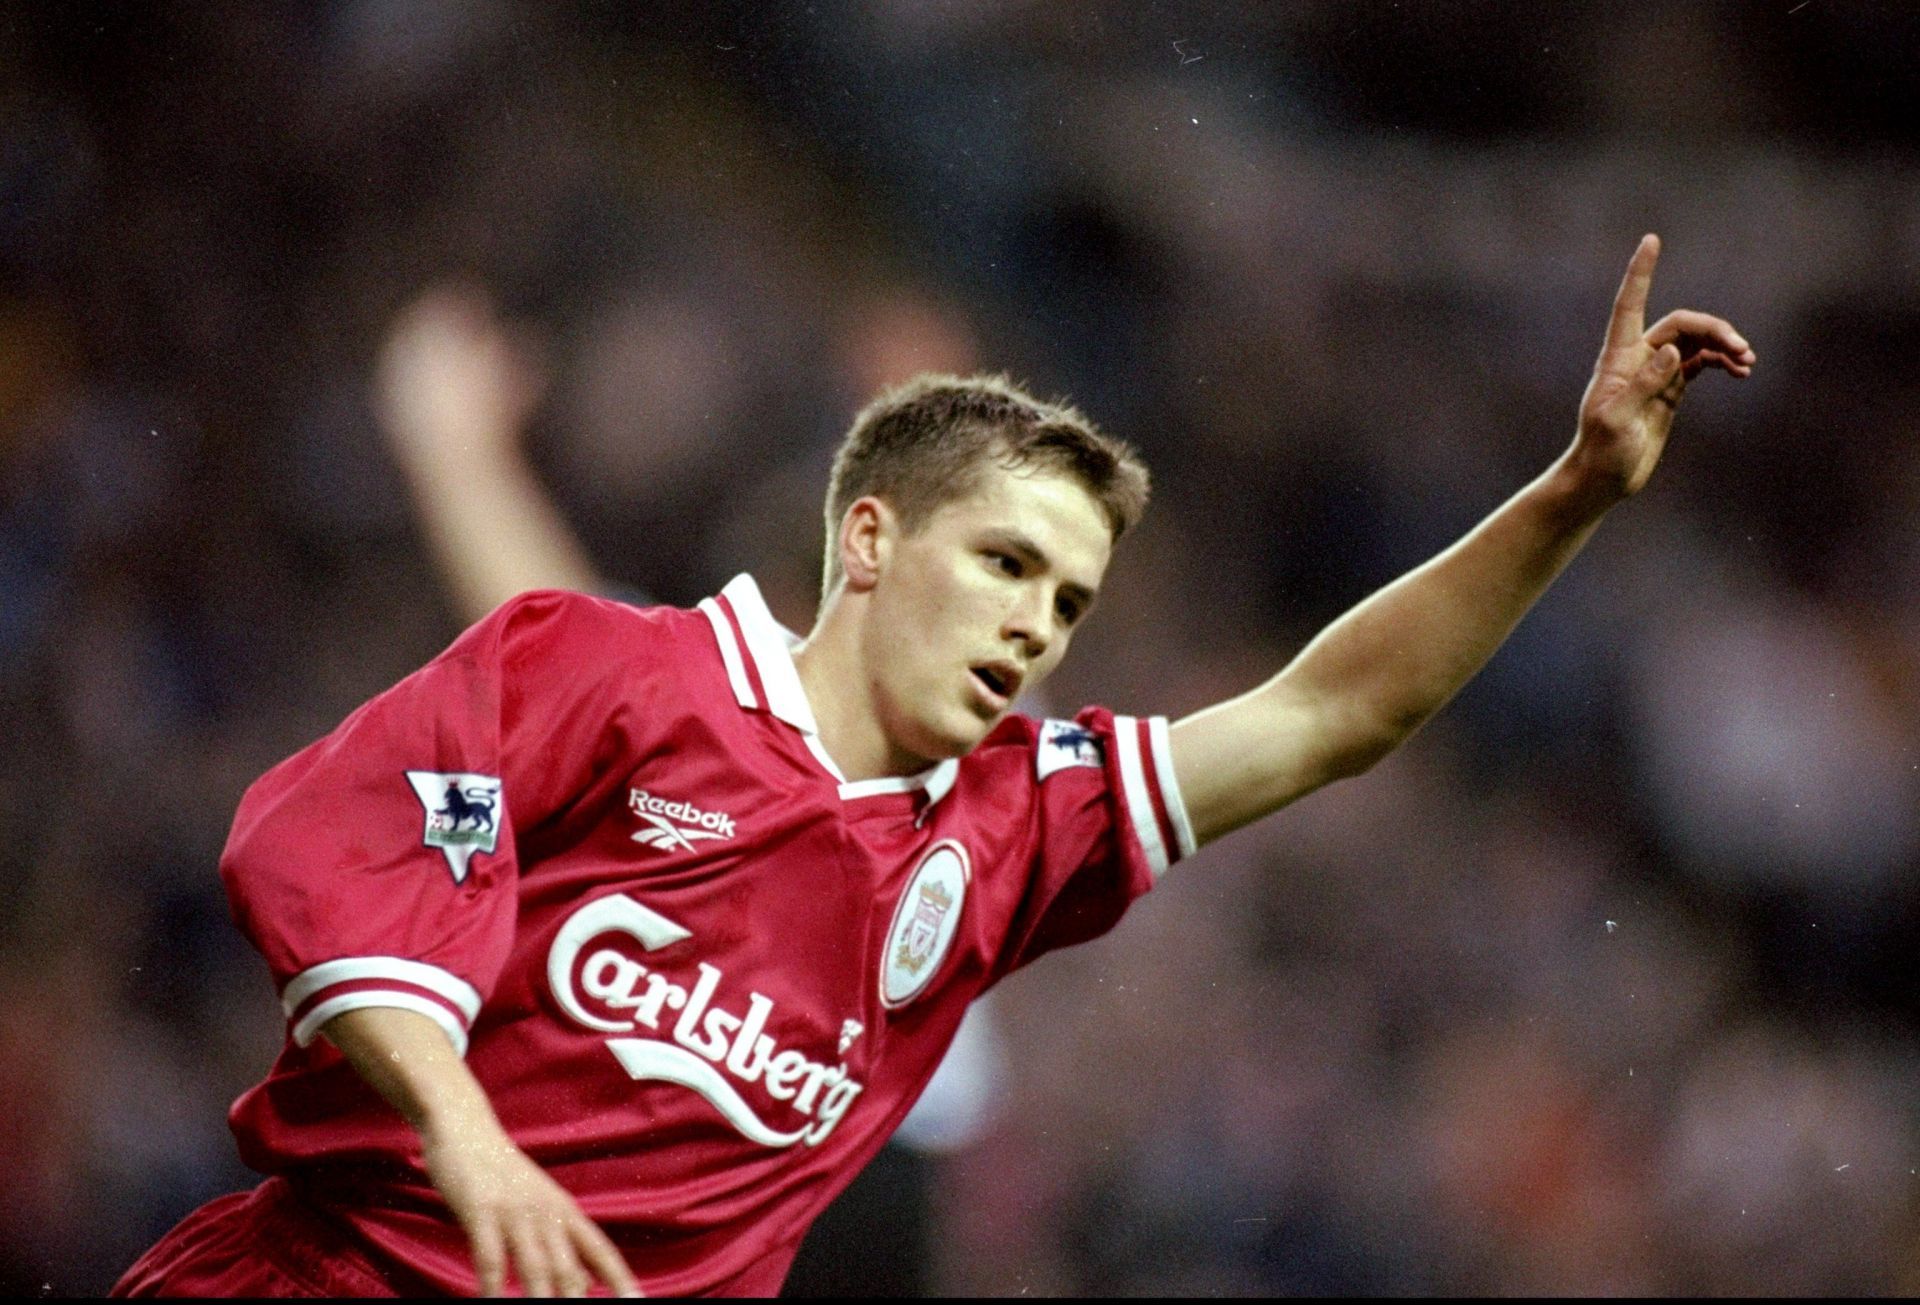 Michael Owen was a Premier League superstar while playing for Liverpool